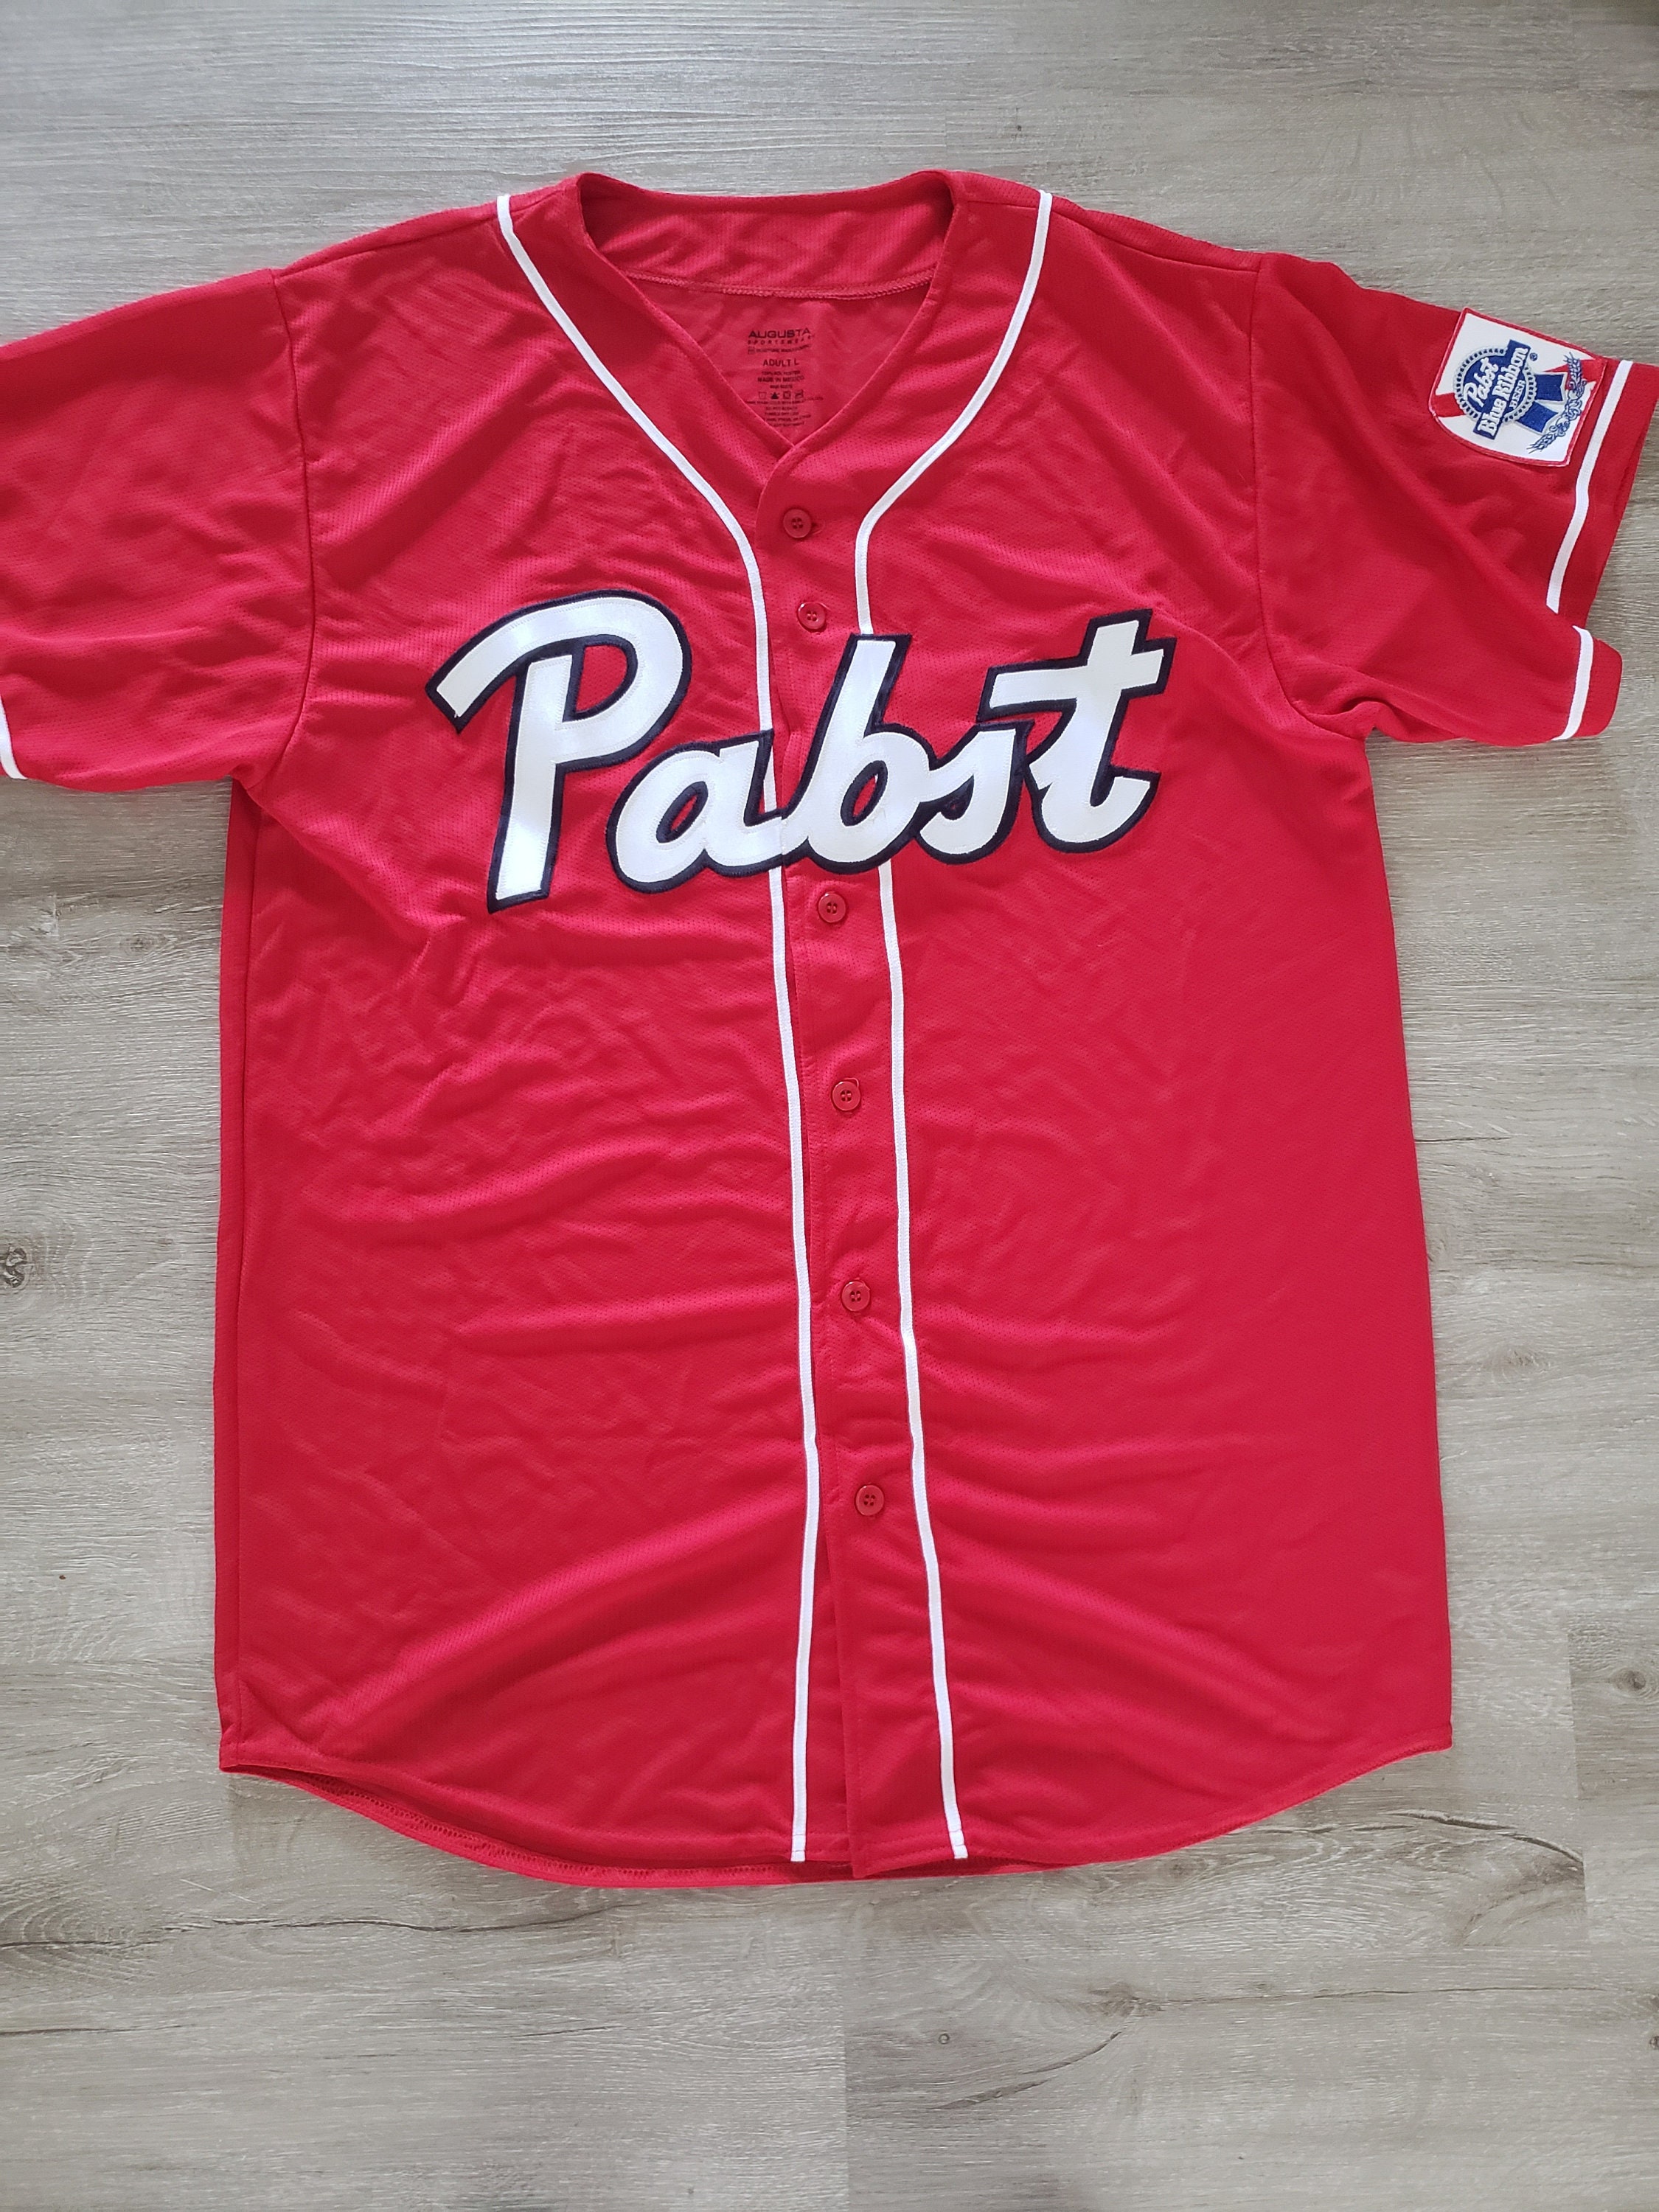 NEW WITH TAGS SIZE 48 PABST BLUE RIBBON BASEBALL JERSEY